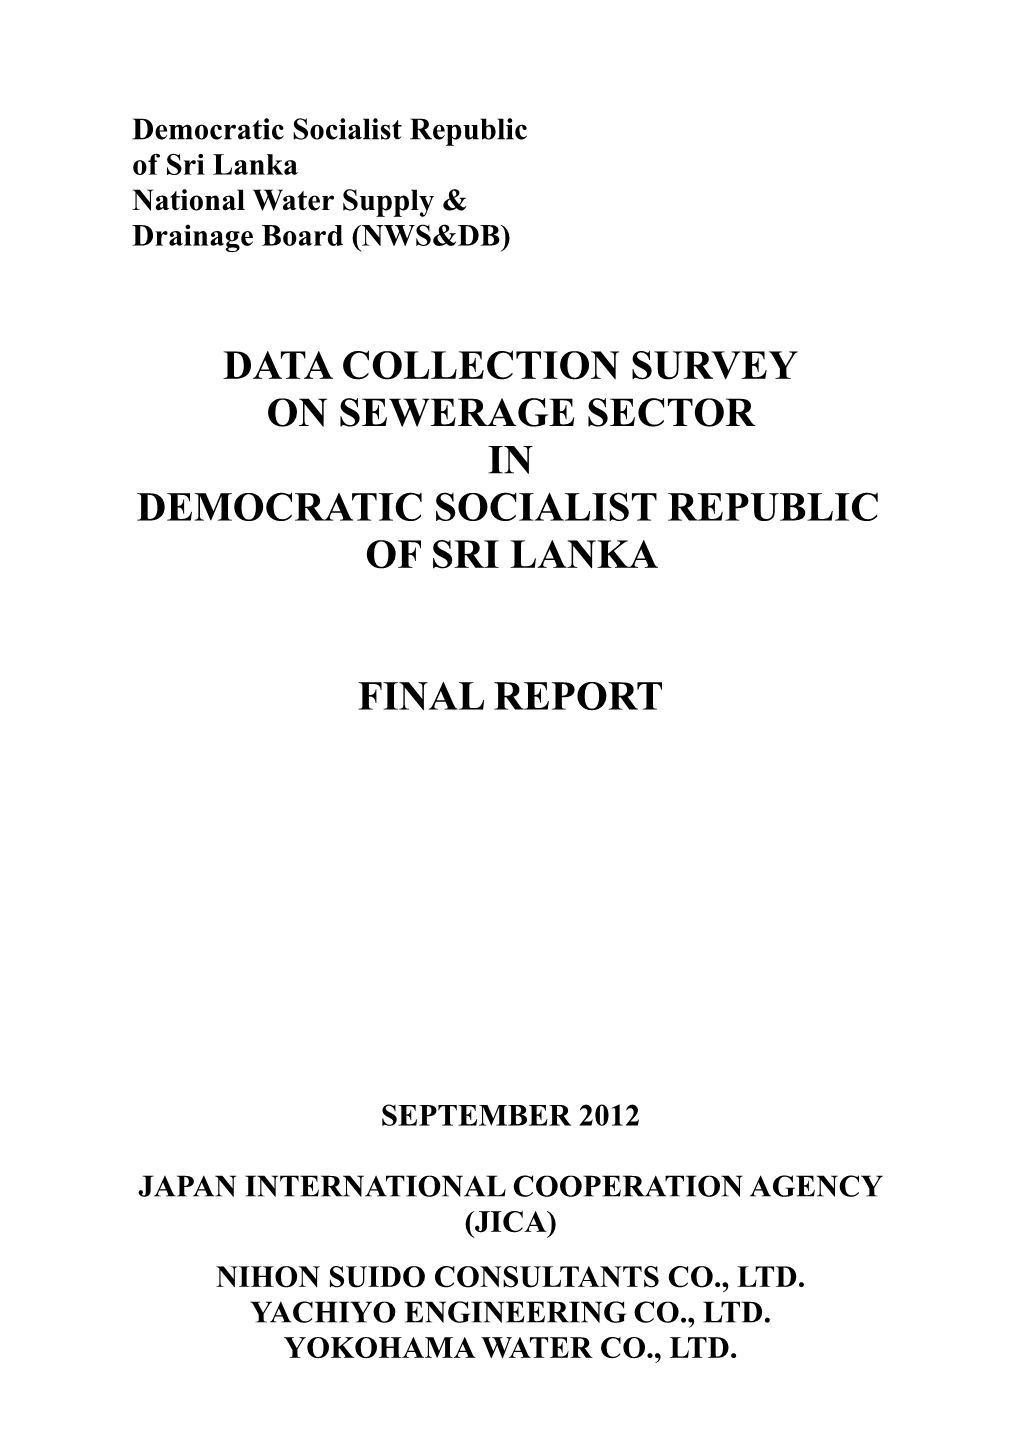 Data Collection Survey on Sewerage Sector in Democratic Socialist Republic of Sri Lanka